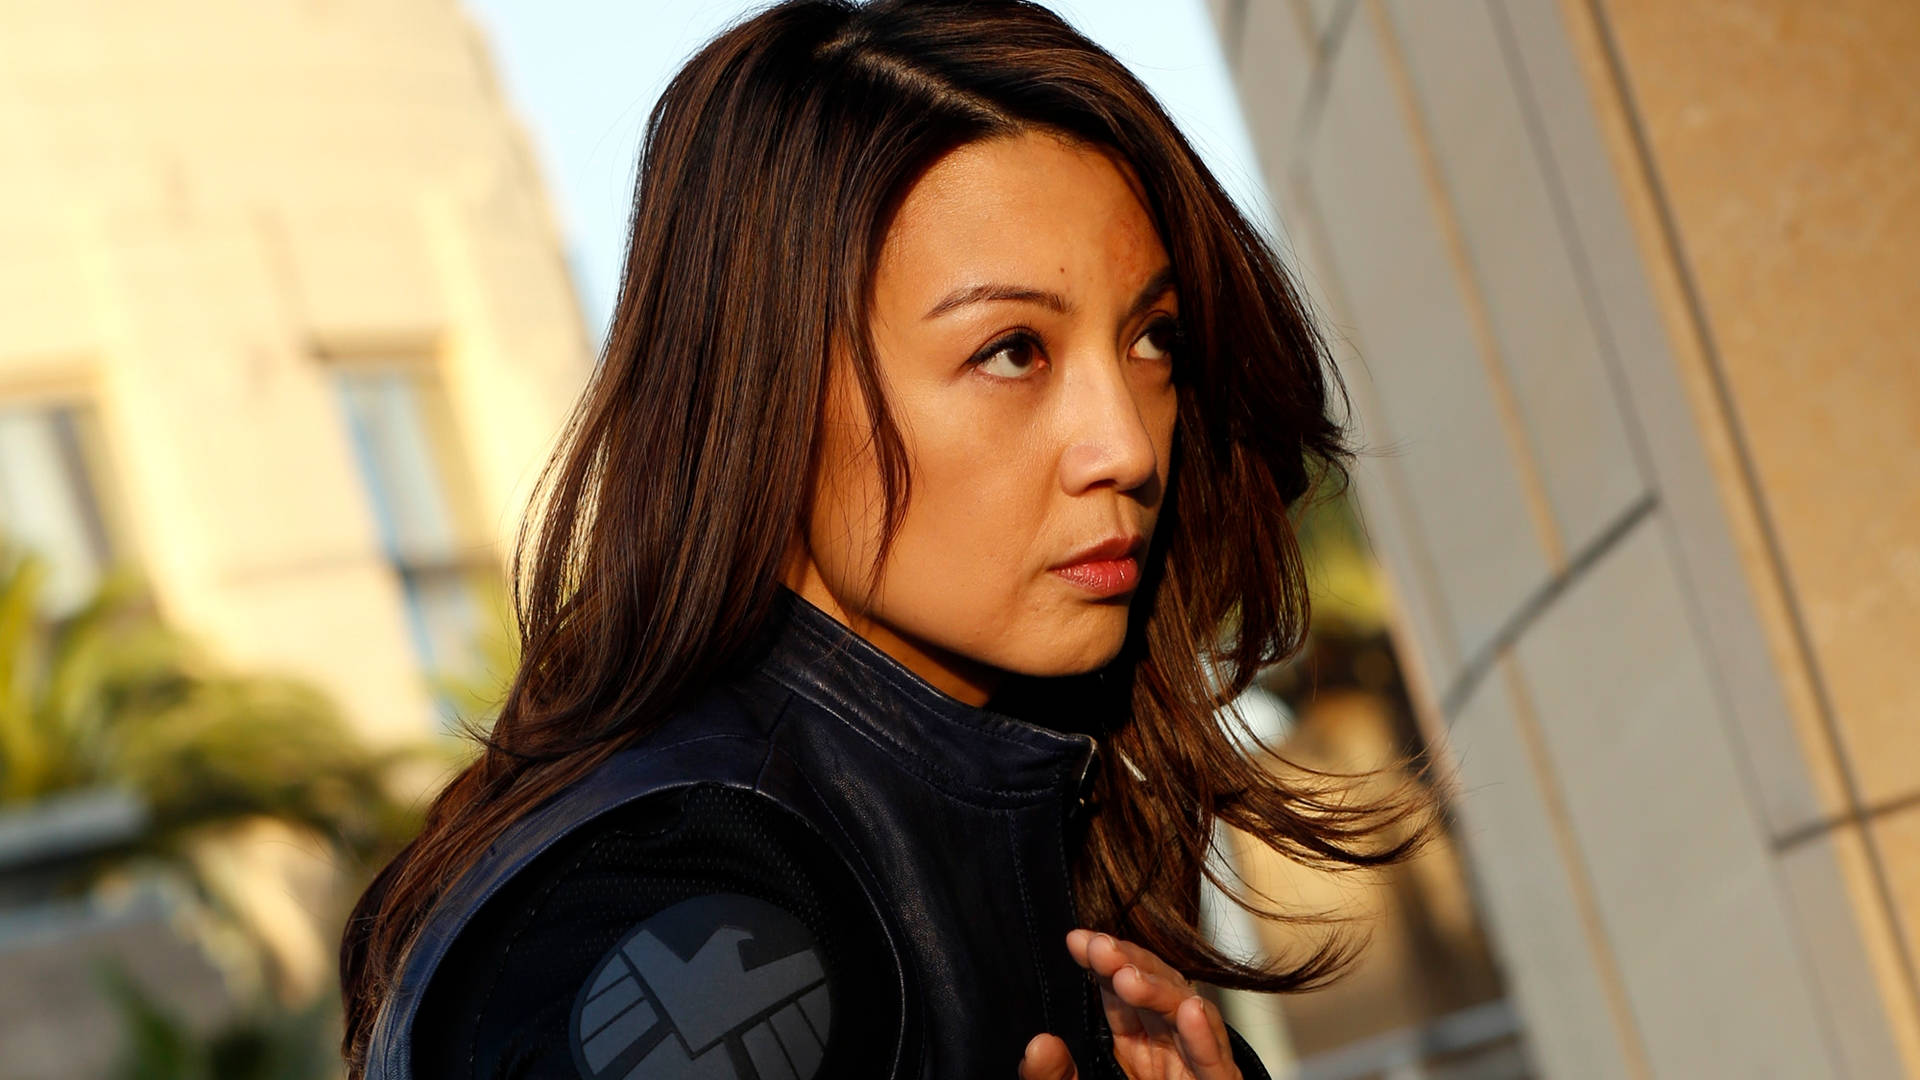 Agents Of Shield Melinda May Side View Close Up Background